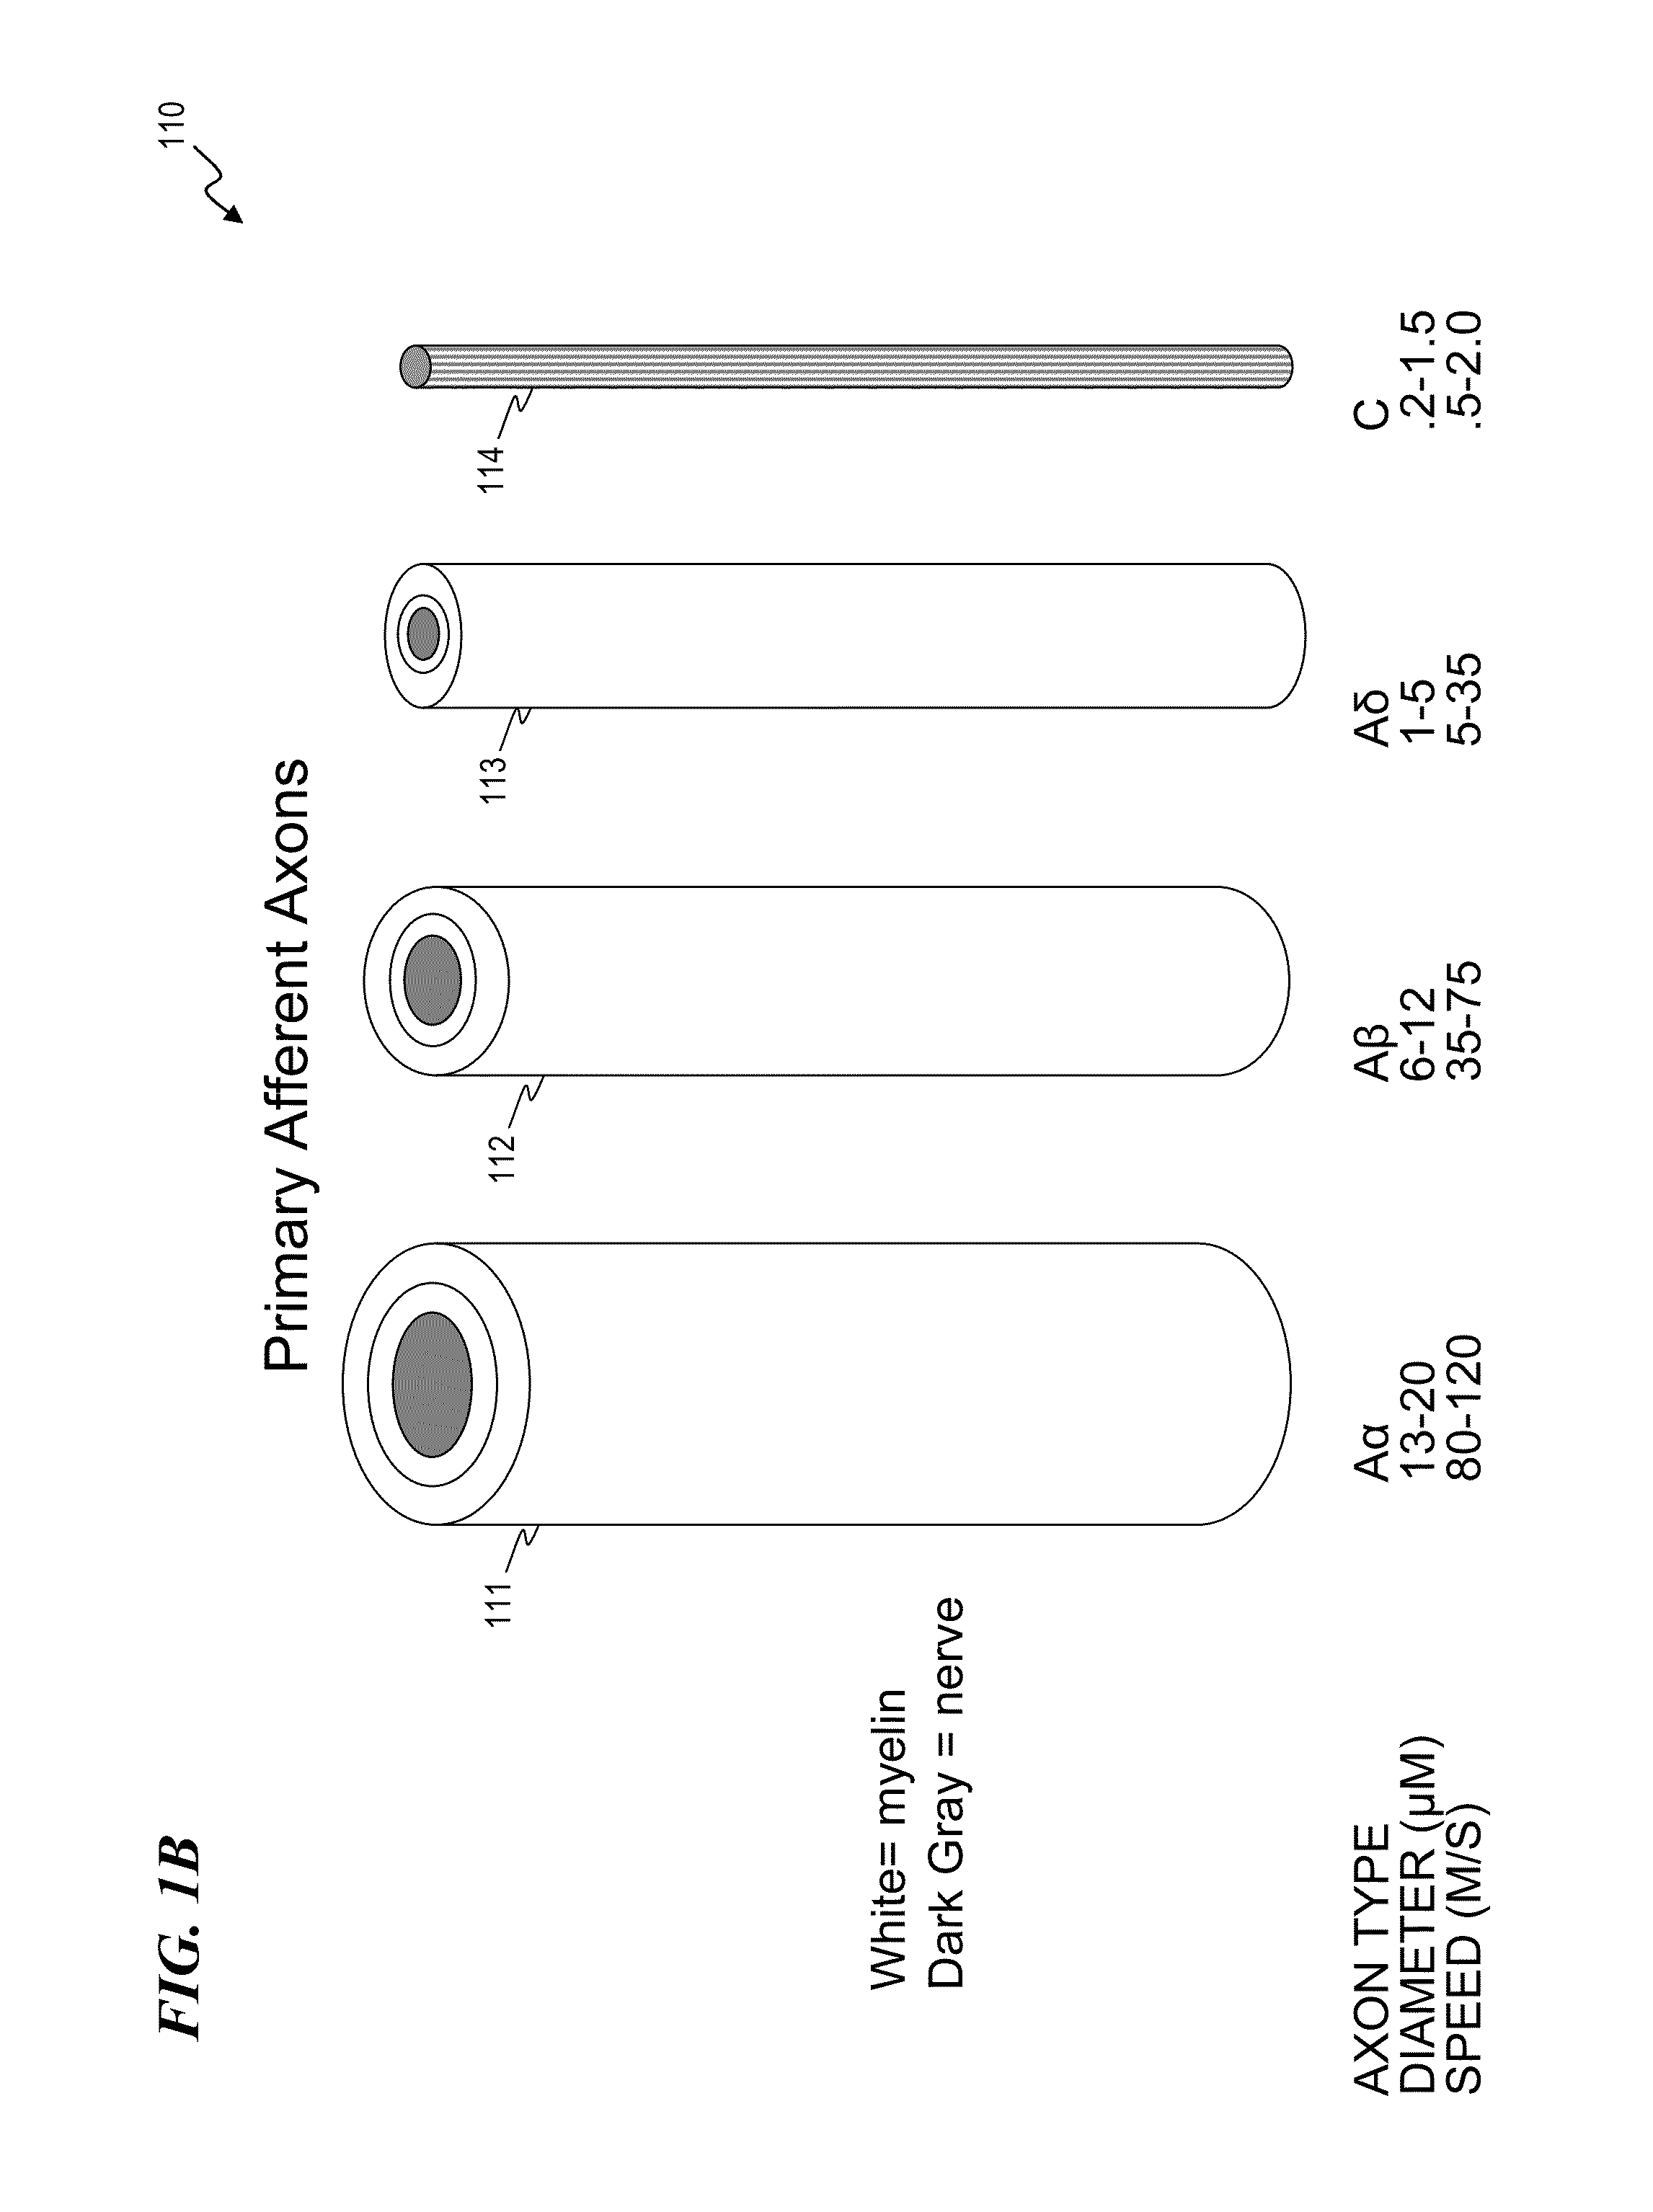 Apparatus and method for managing chronic pain with infrared light sources and heat